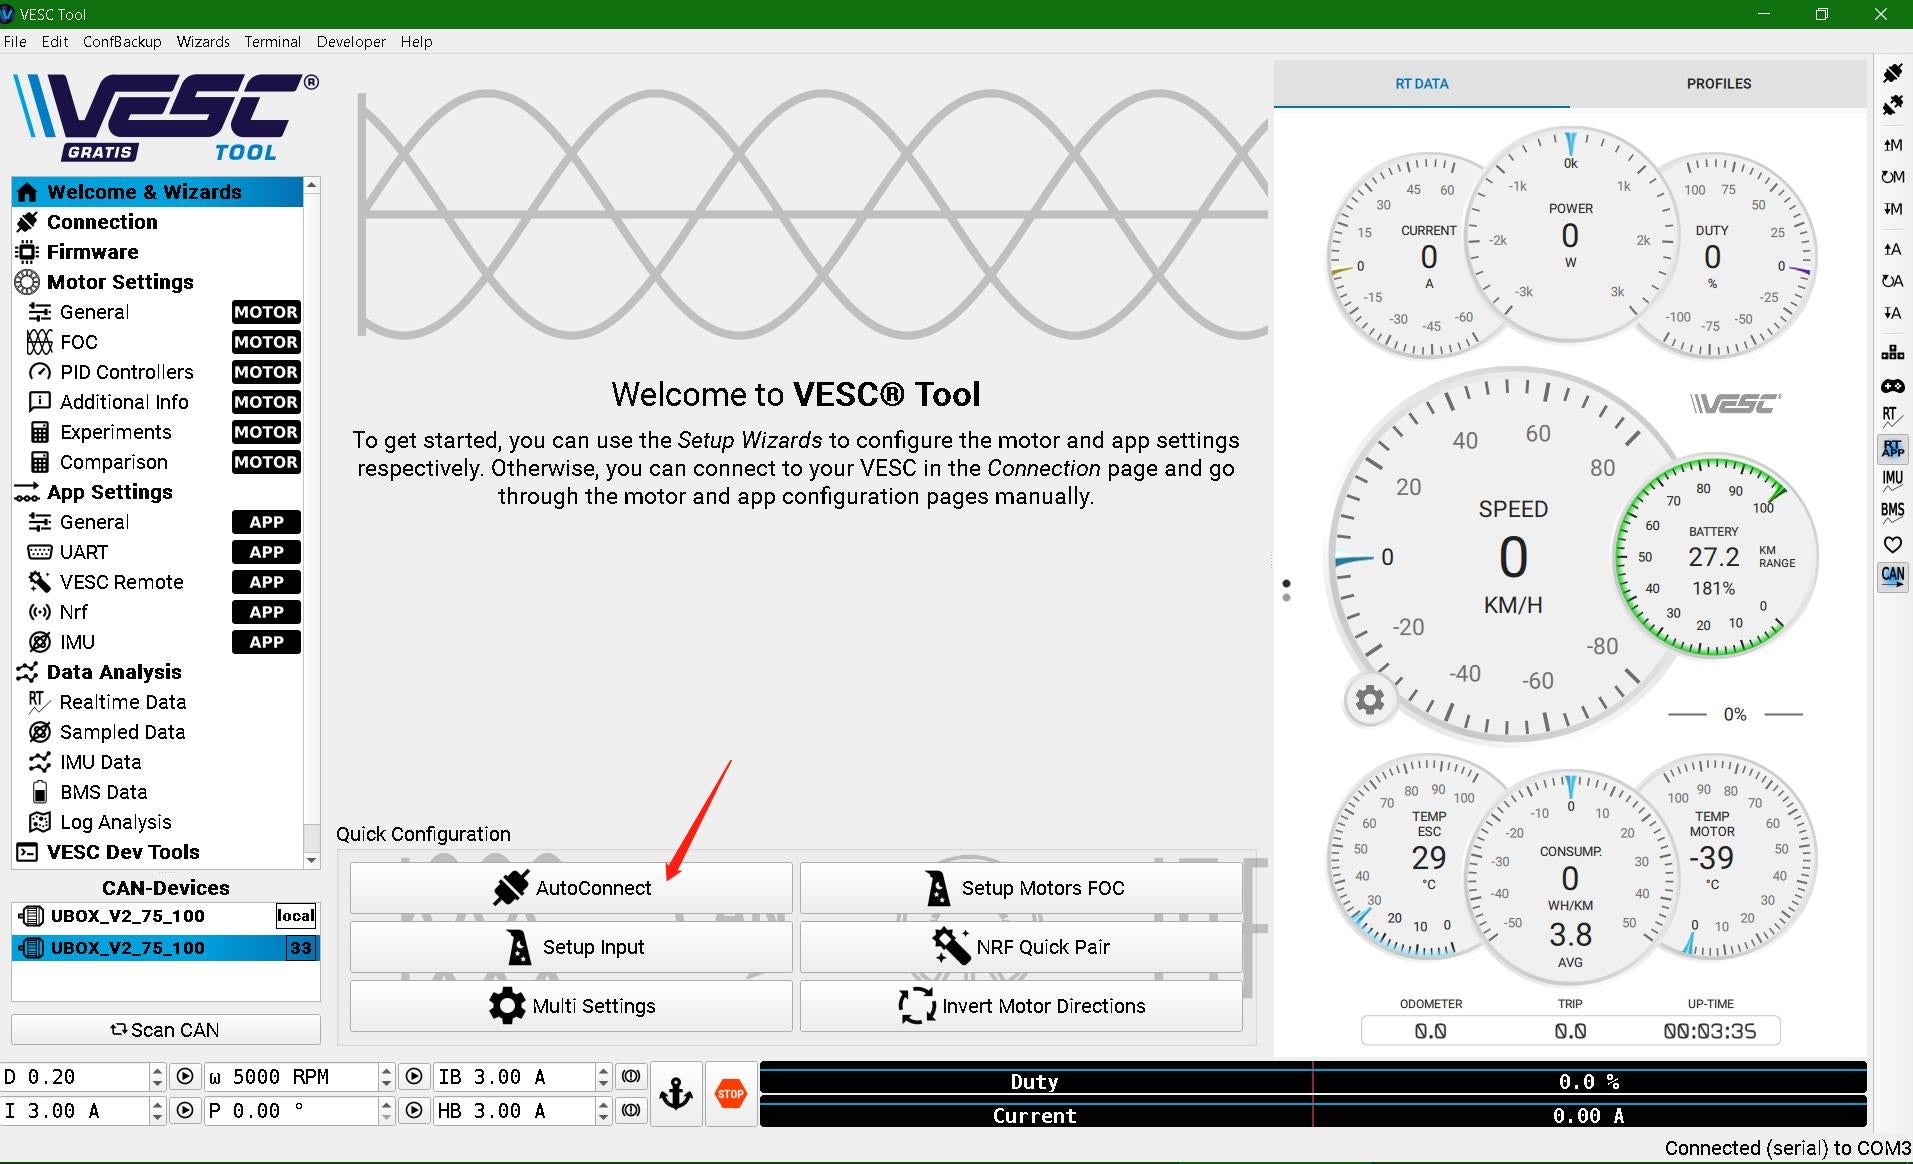 step1: Click connect to connect UBox with VESC tool